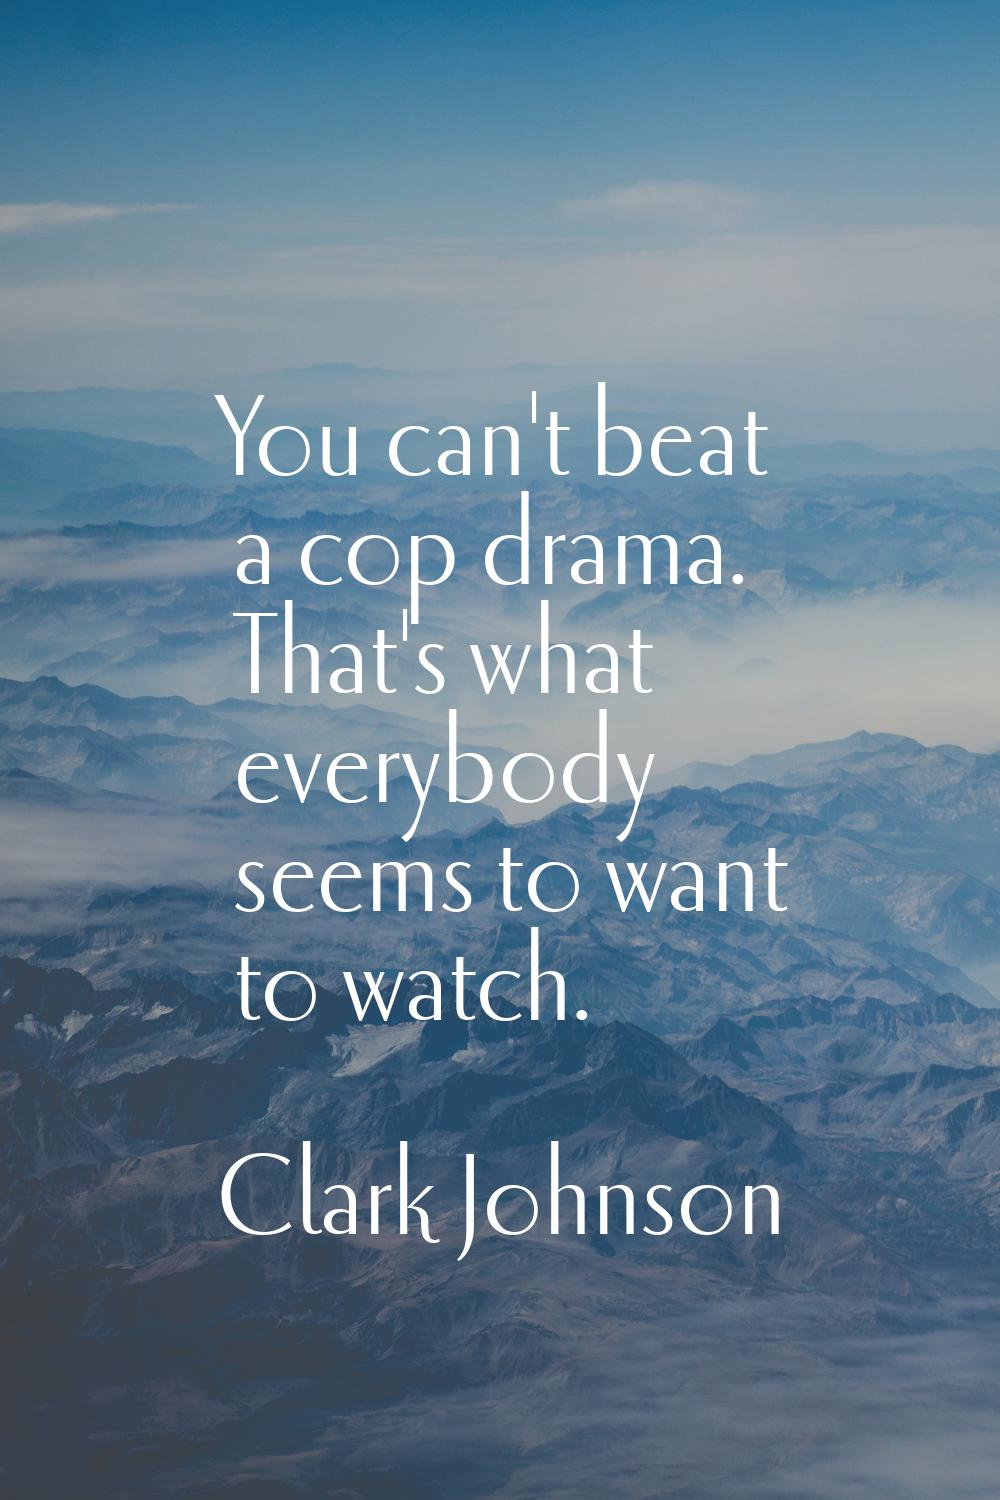 You can't beat a cop drama. That's what everybody seems to want to watch.